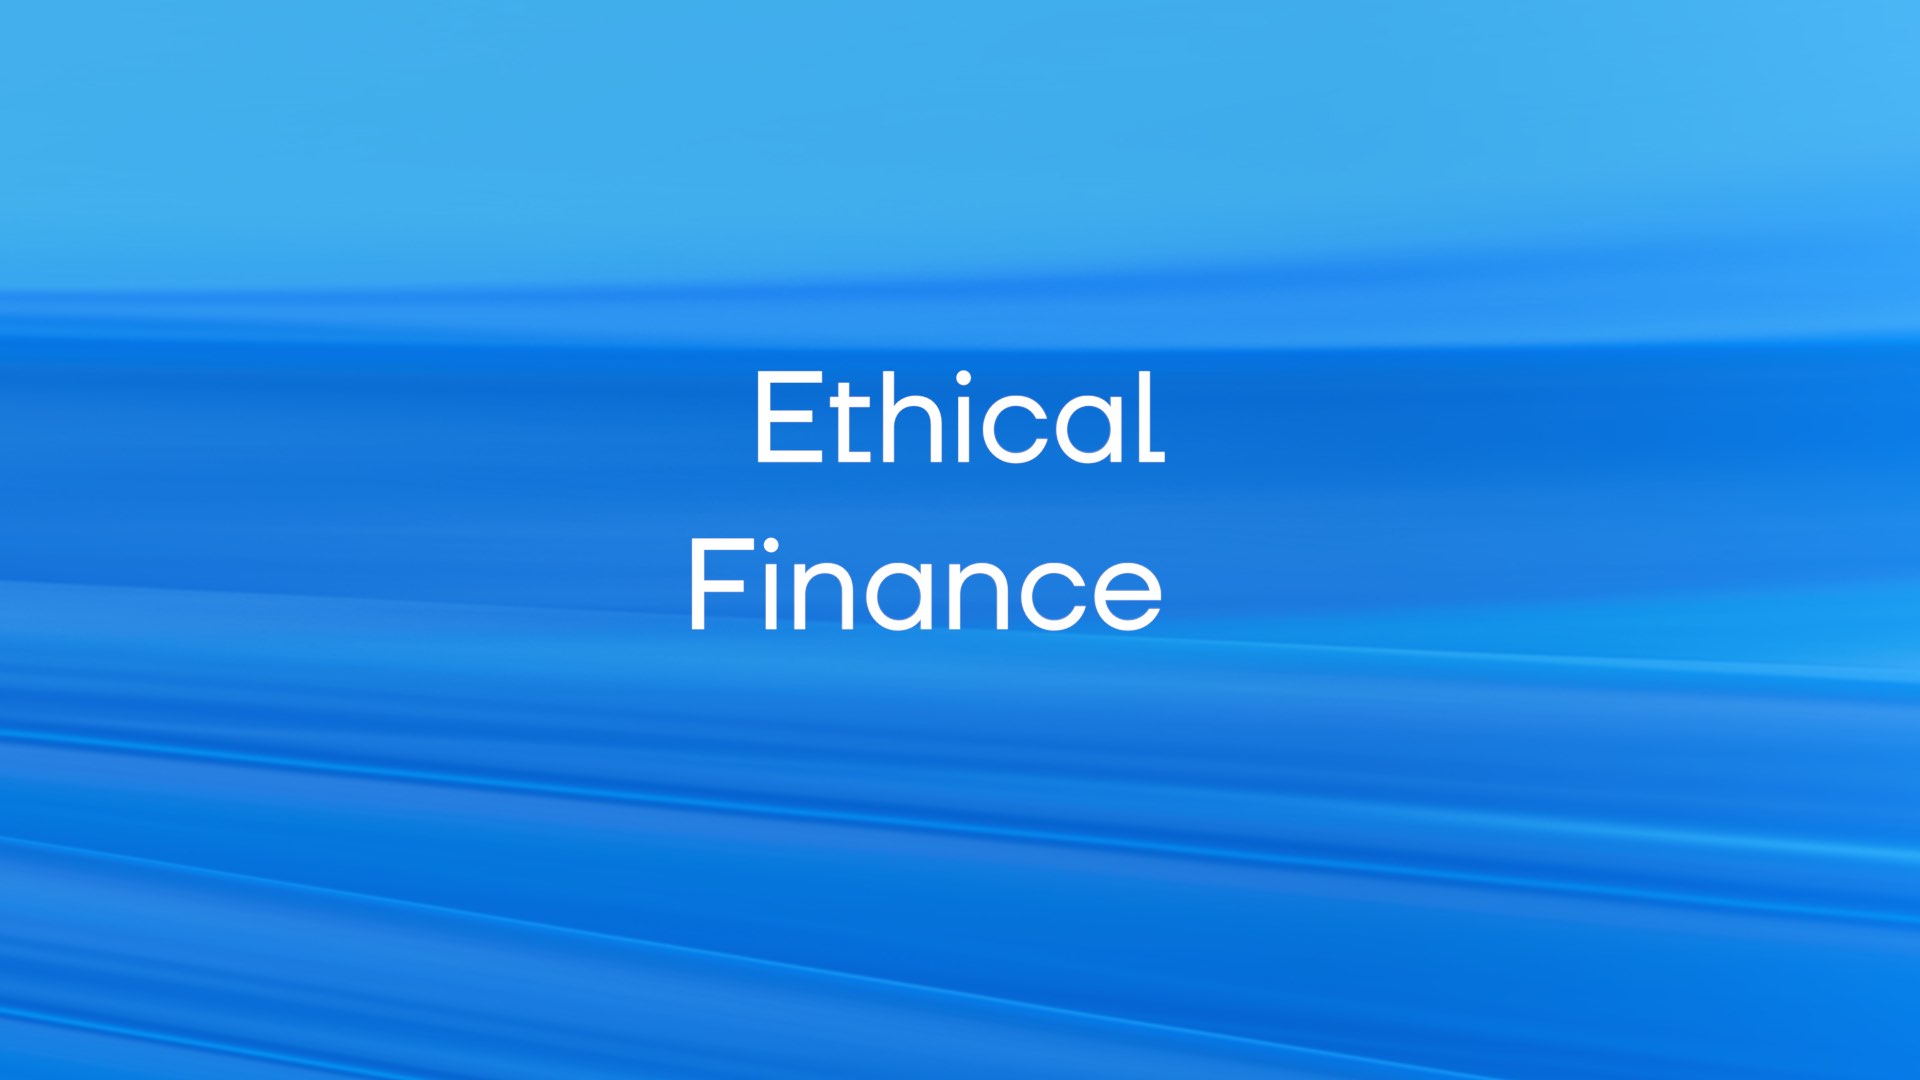 Sustainable Finance by Choice or By Decree?